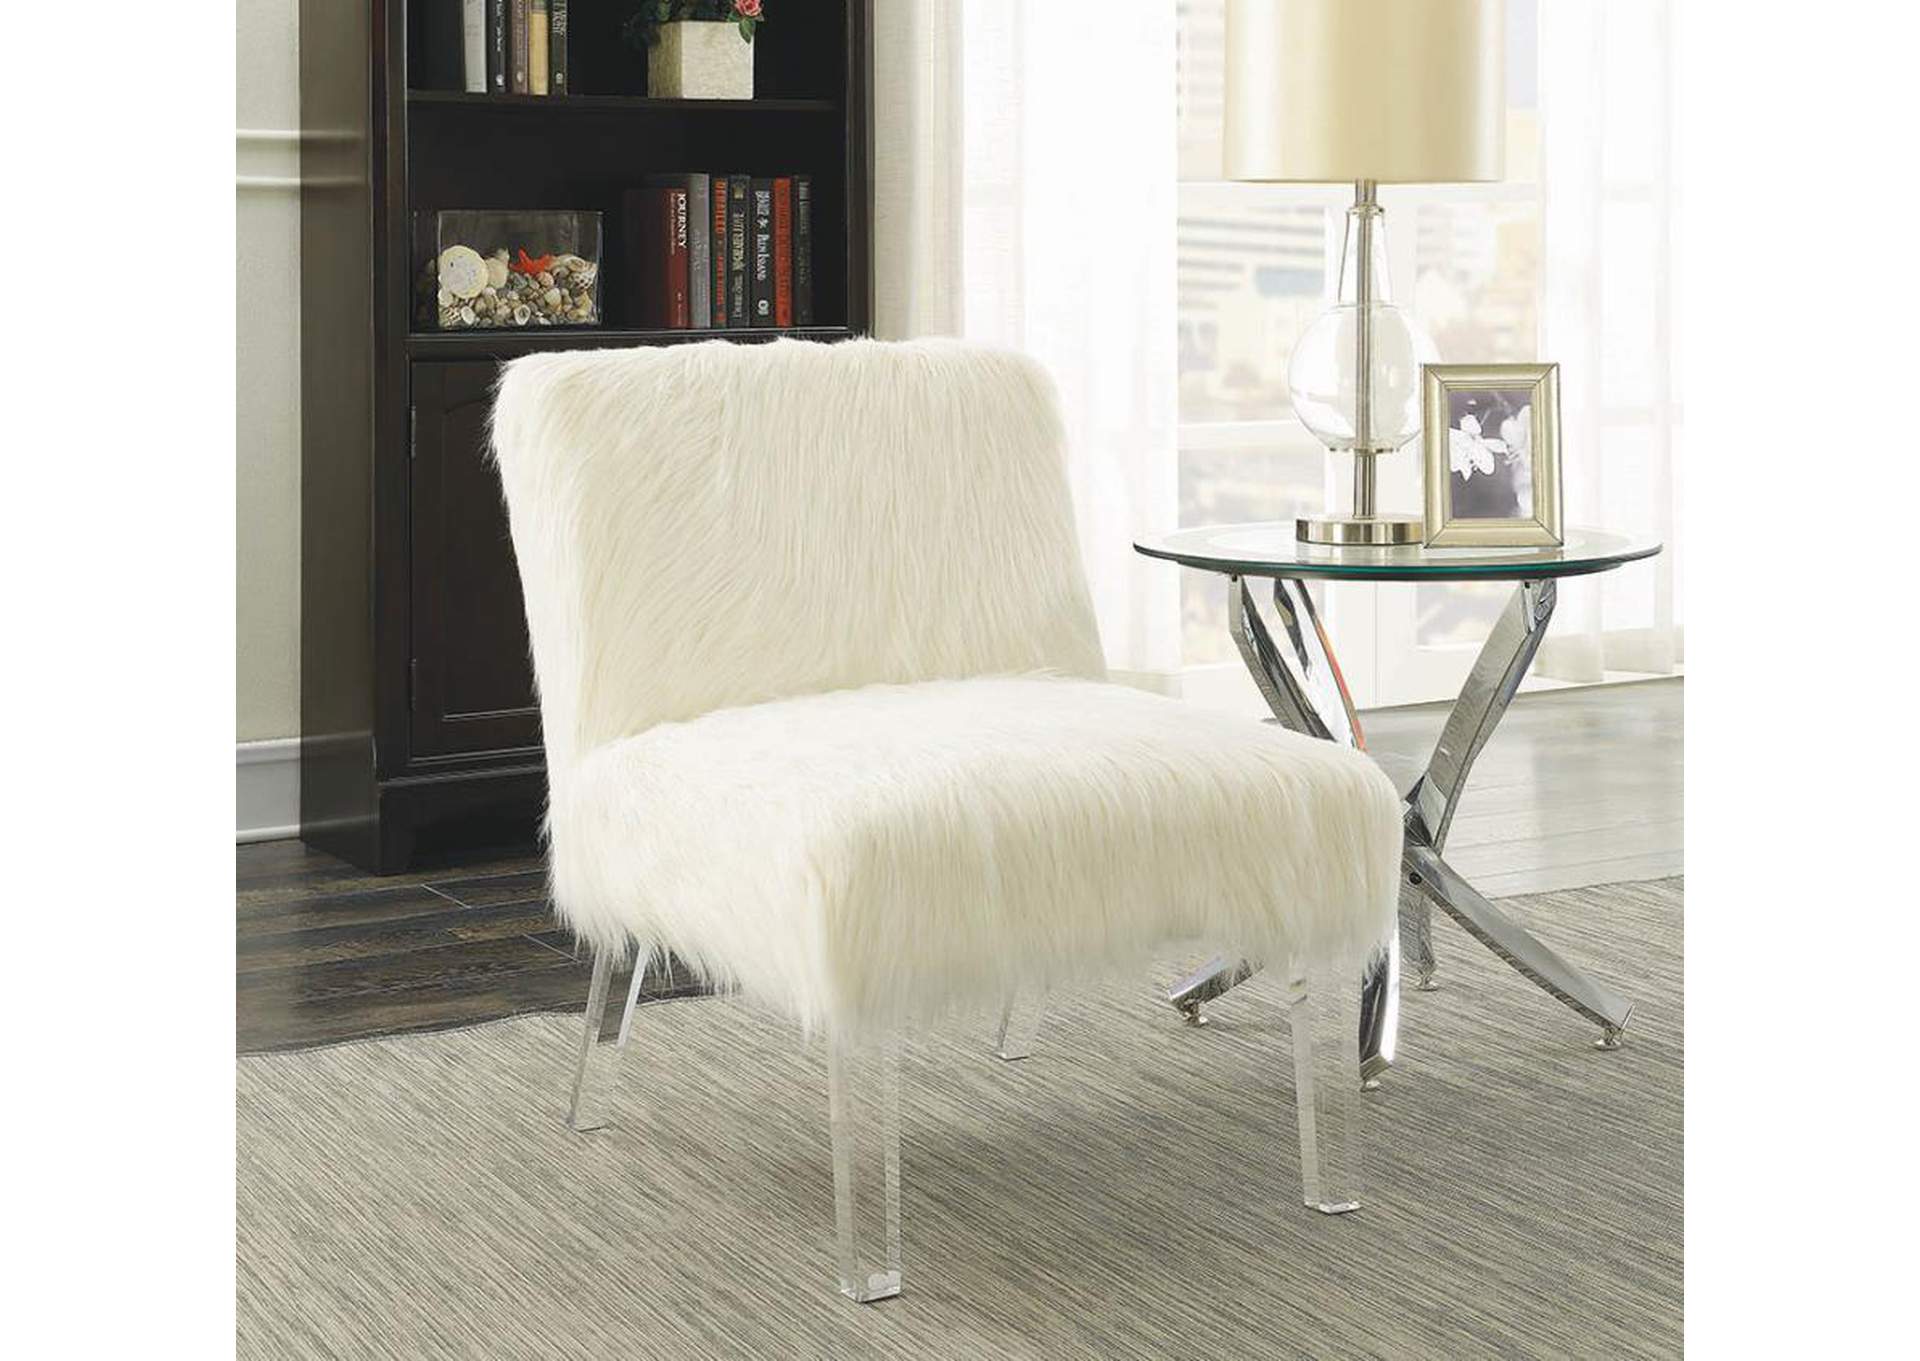 Faux Sheepskin Upholstered Accent Chair White,Coaster Furniture